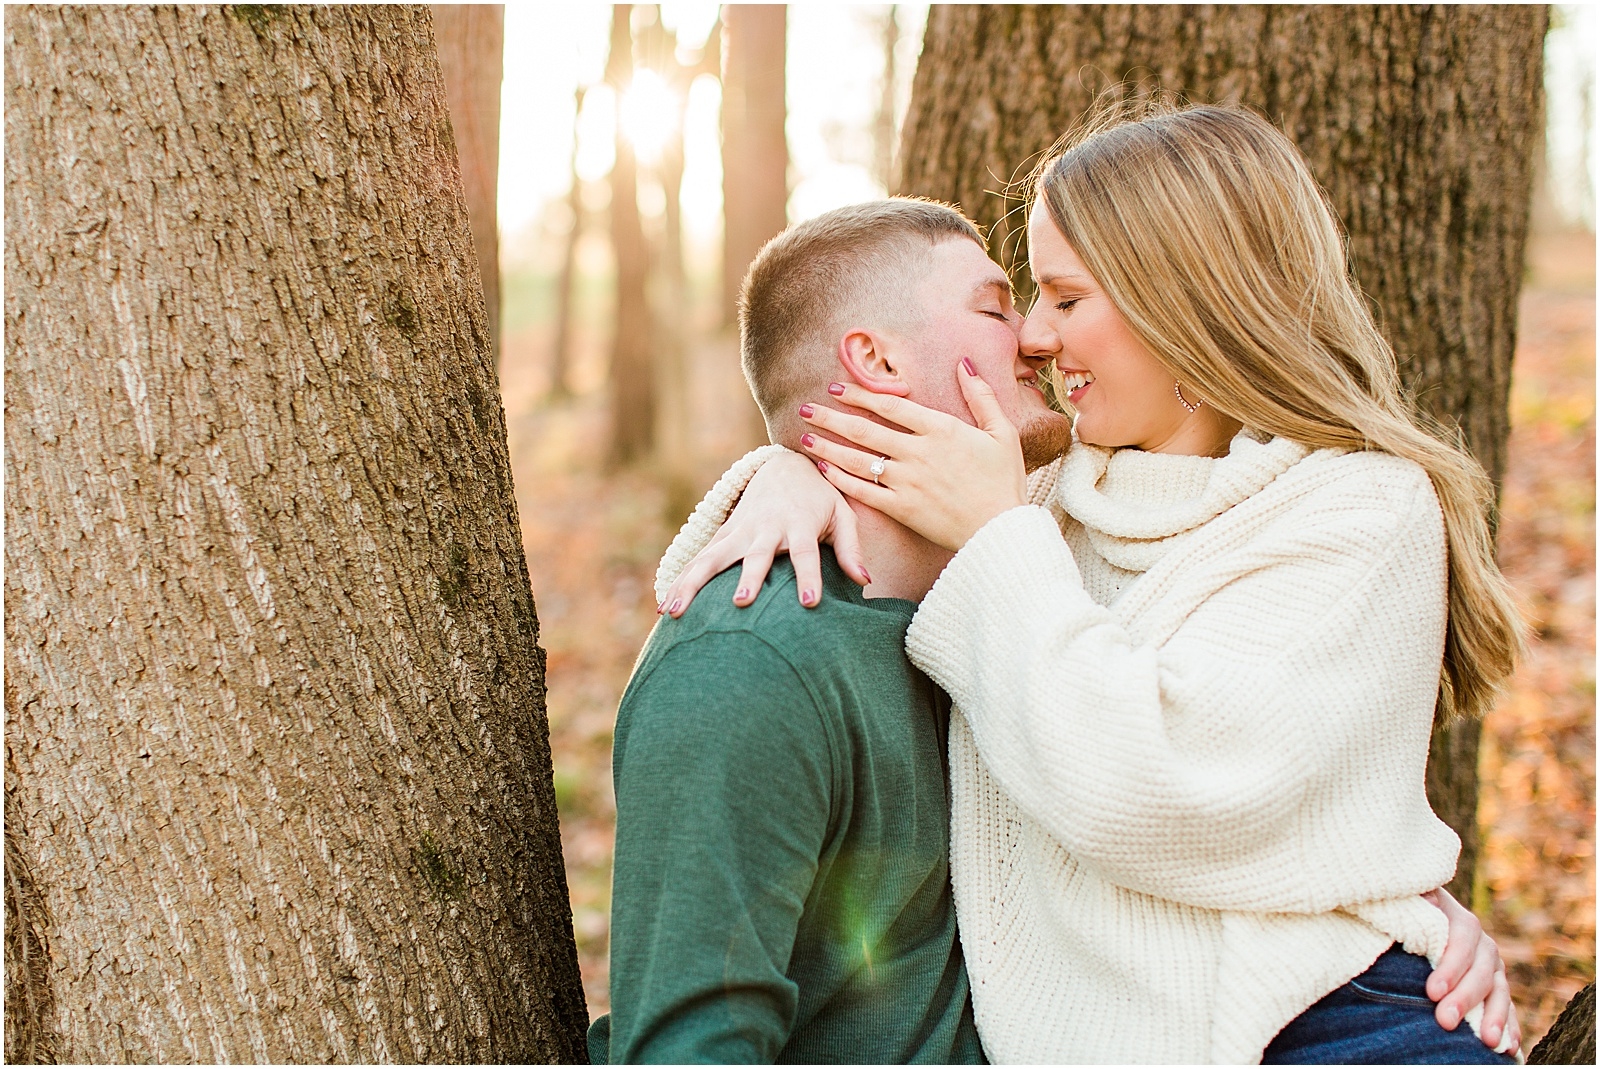 A Fall Southern Indiana Engagement Seesion | Cody and Hannah | Bret and Brandie Photography 032.jpg